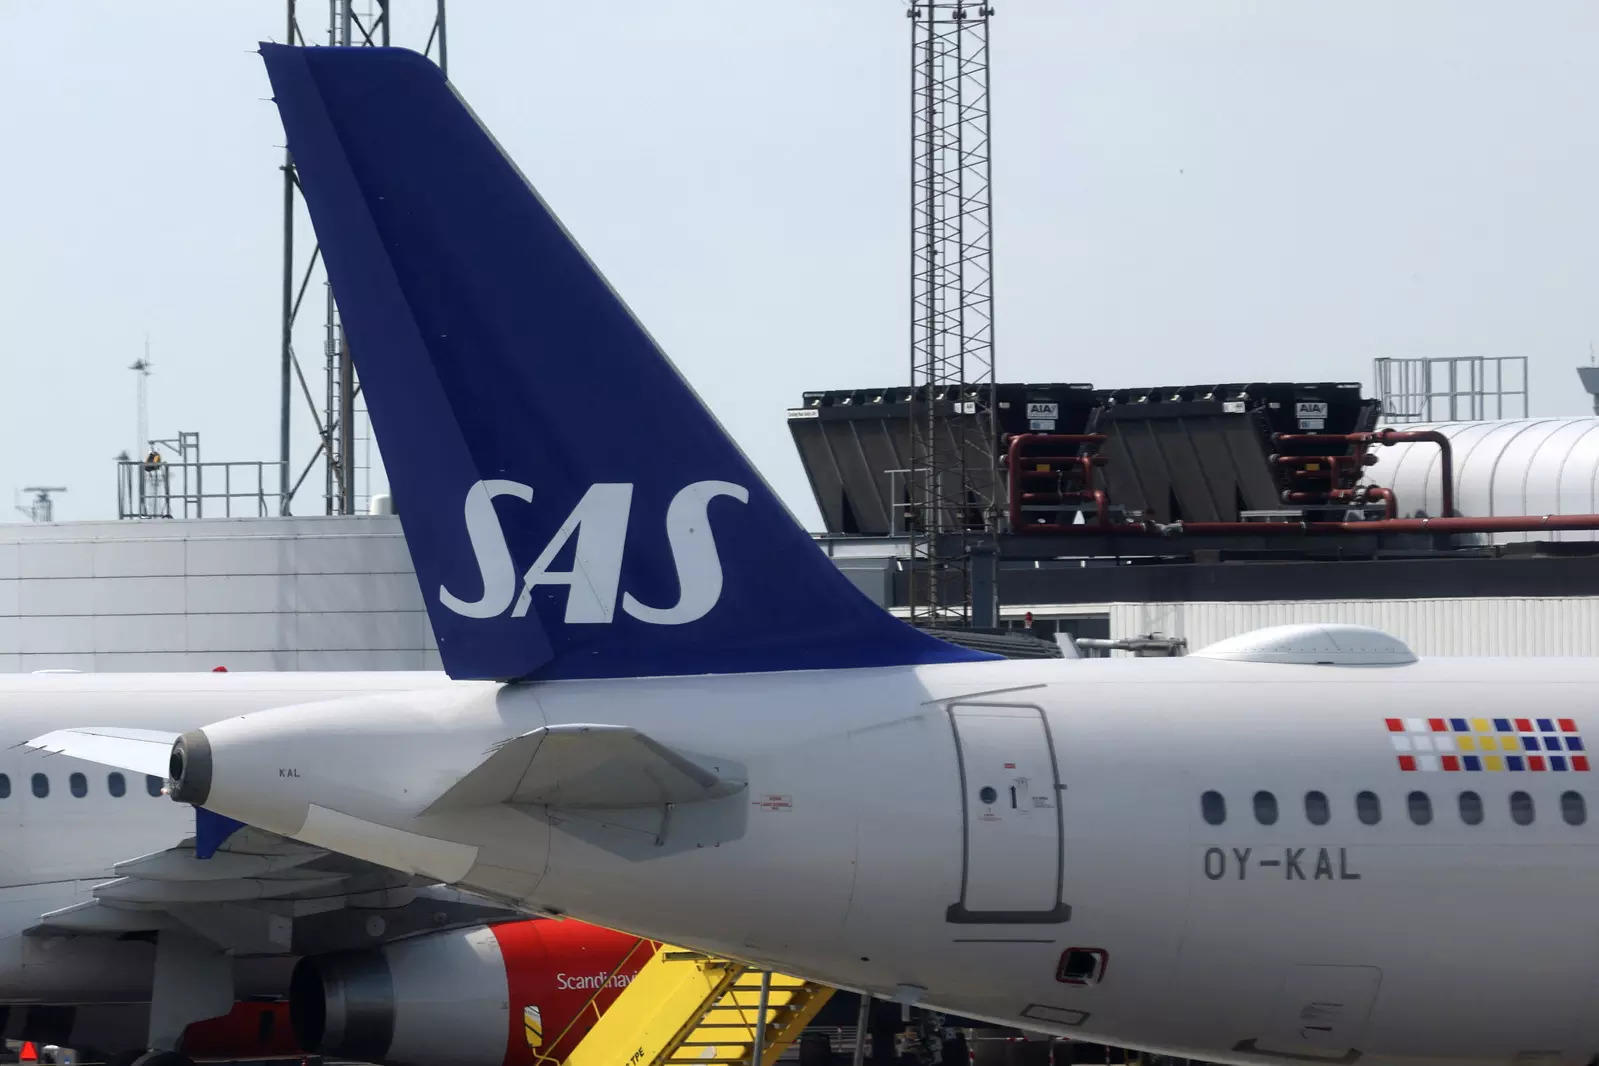  FILE PHOTO: The tail fin of a parked Scandinavian Airlines (SAS) airplane is seen on the tarmac at Copenhagen Airport Kastrup in Copenhagen, Denmark, July 3, 2022. REUTERS/Andrew Kelly